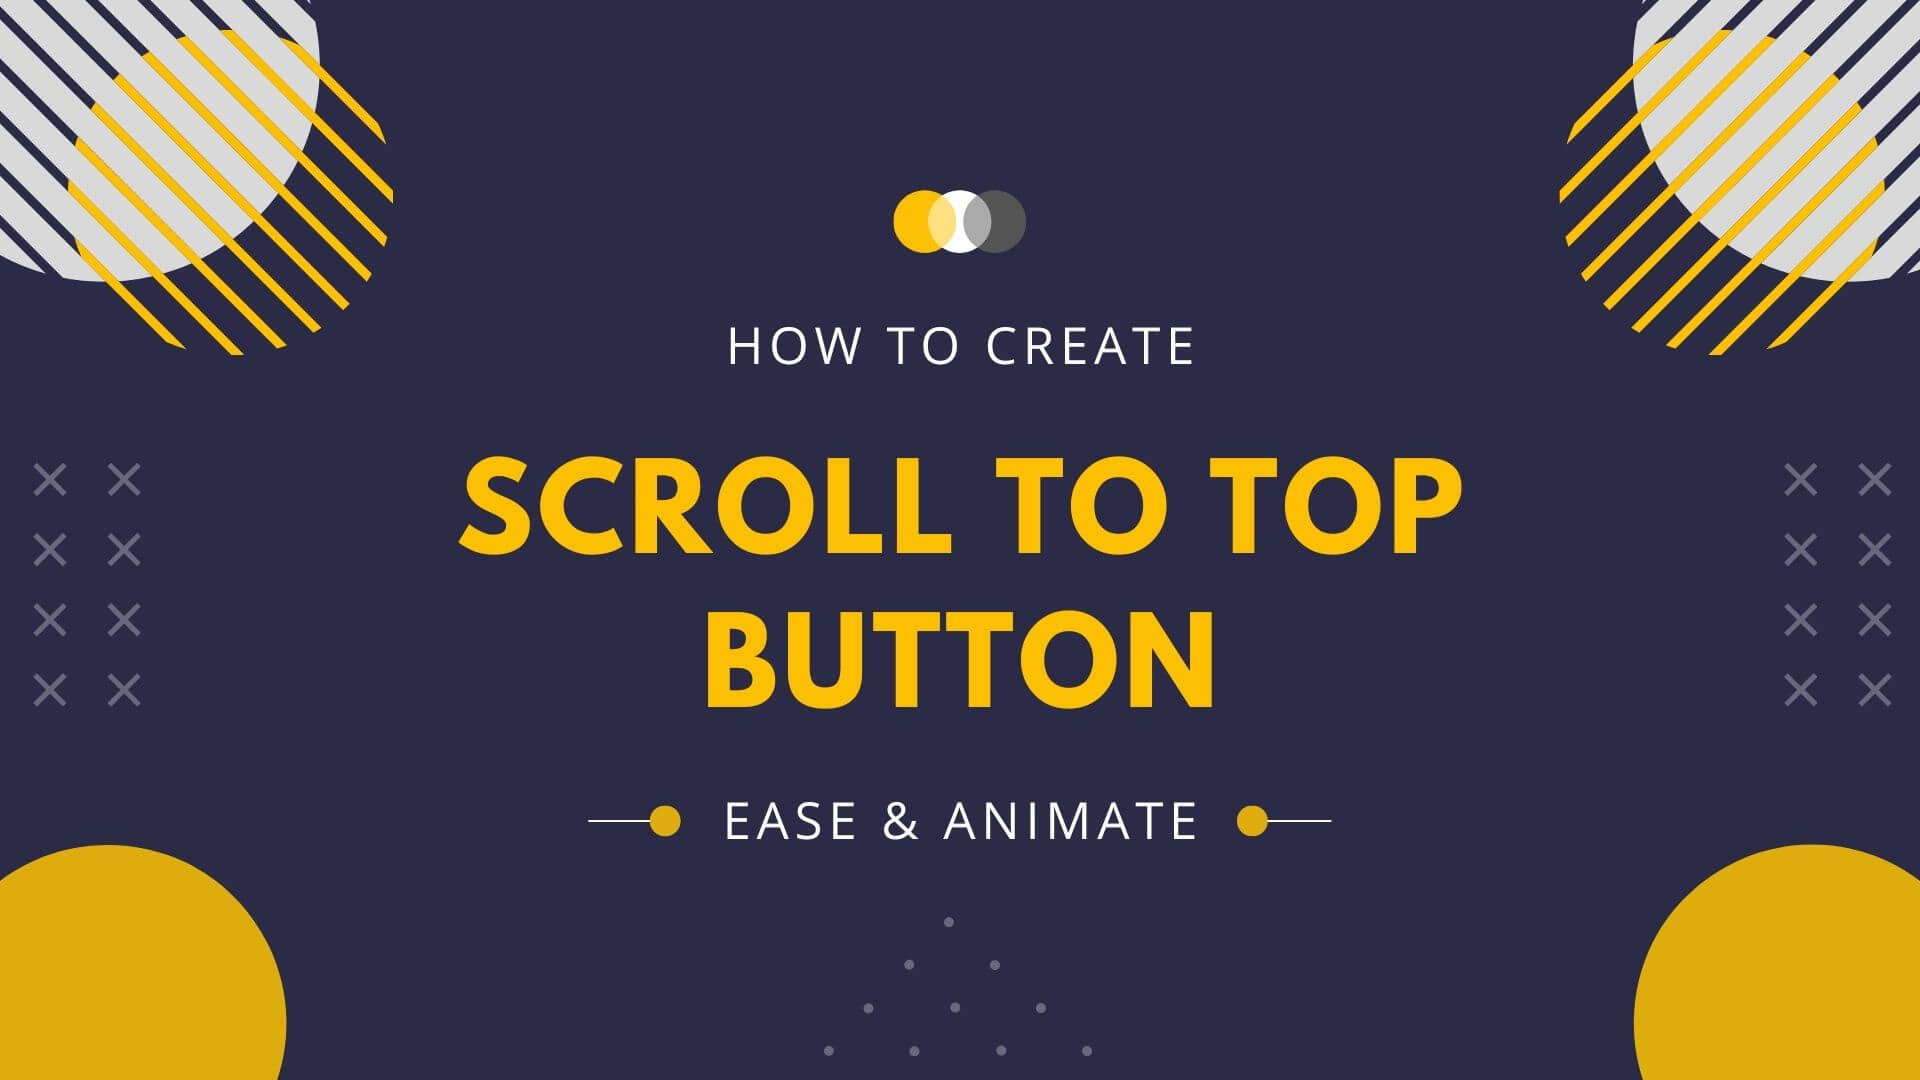 Scroll to top button with ease and animate - W3 Programmings